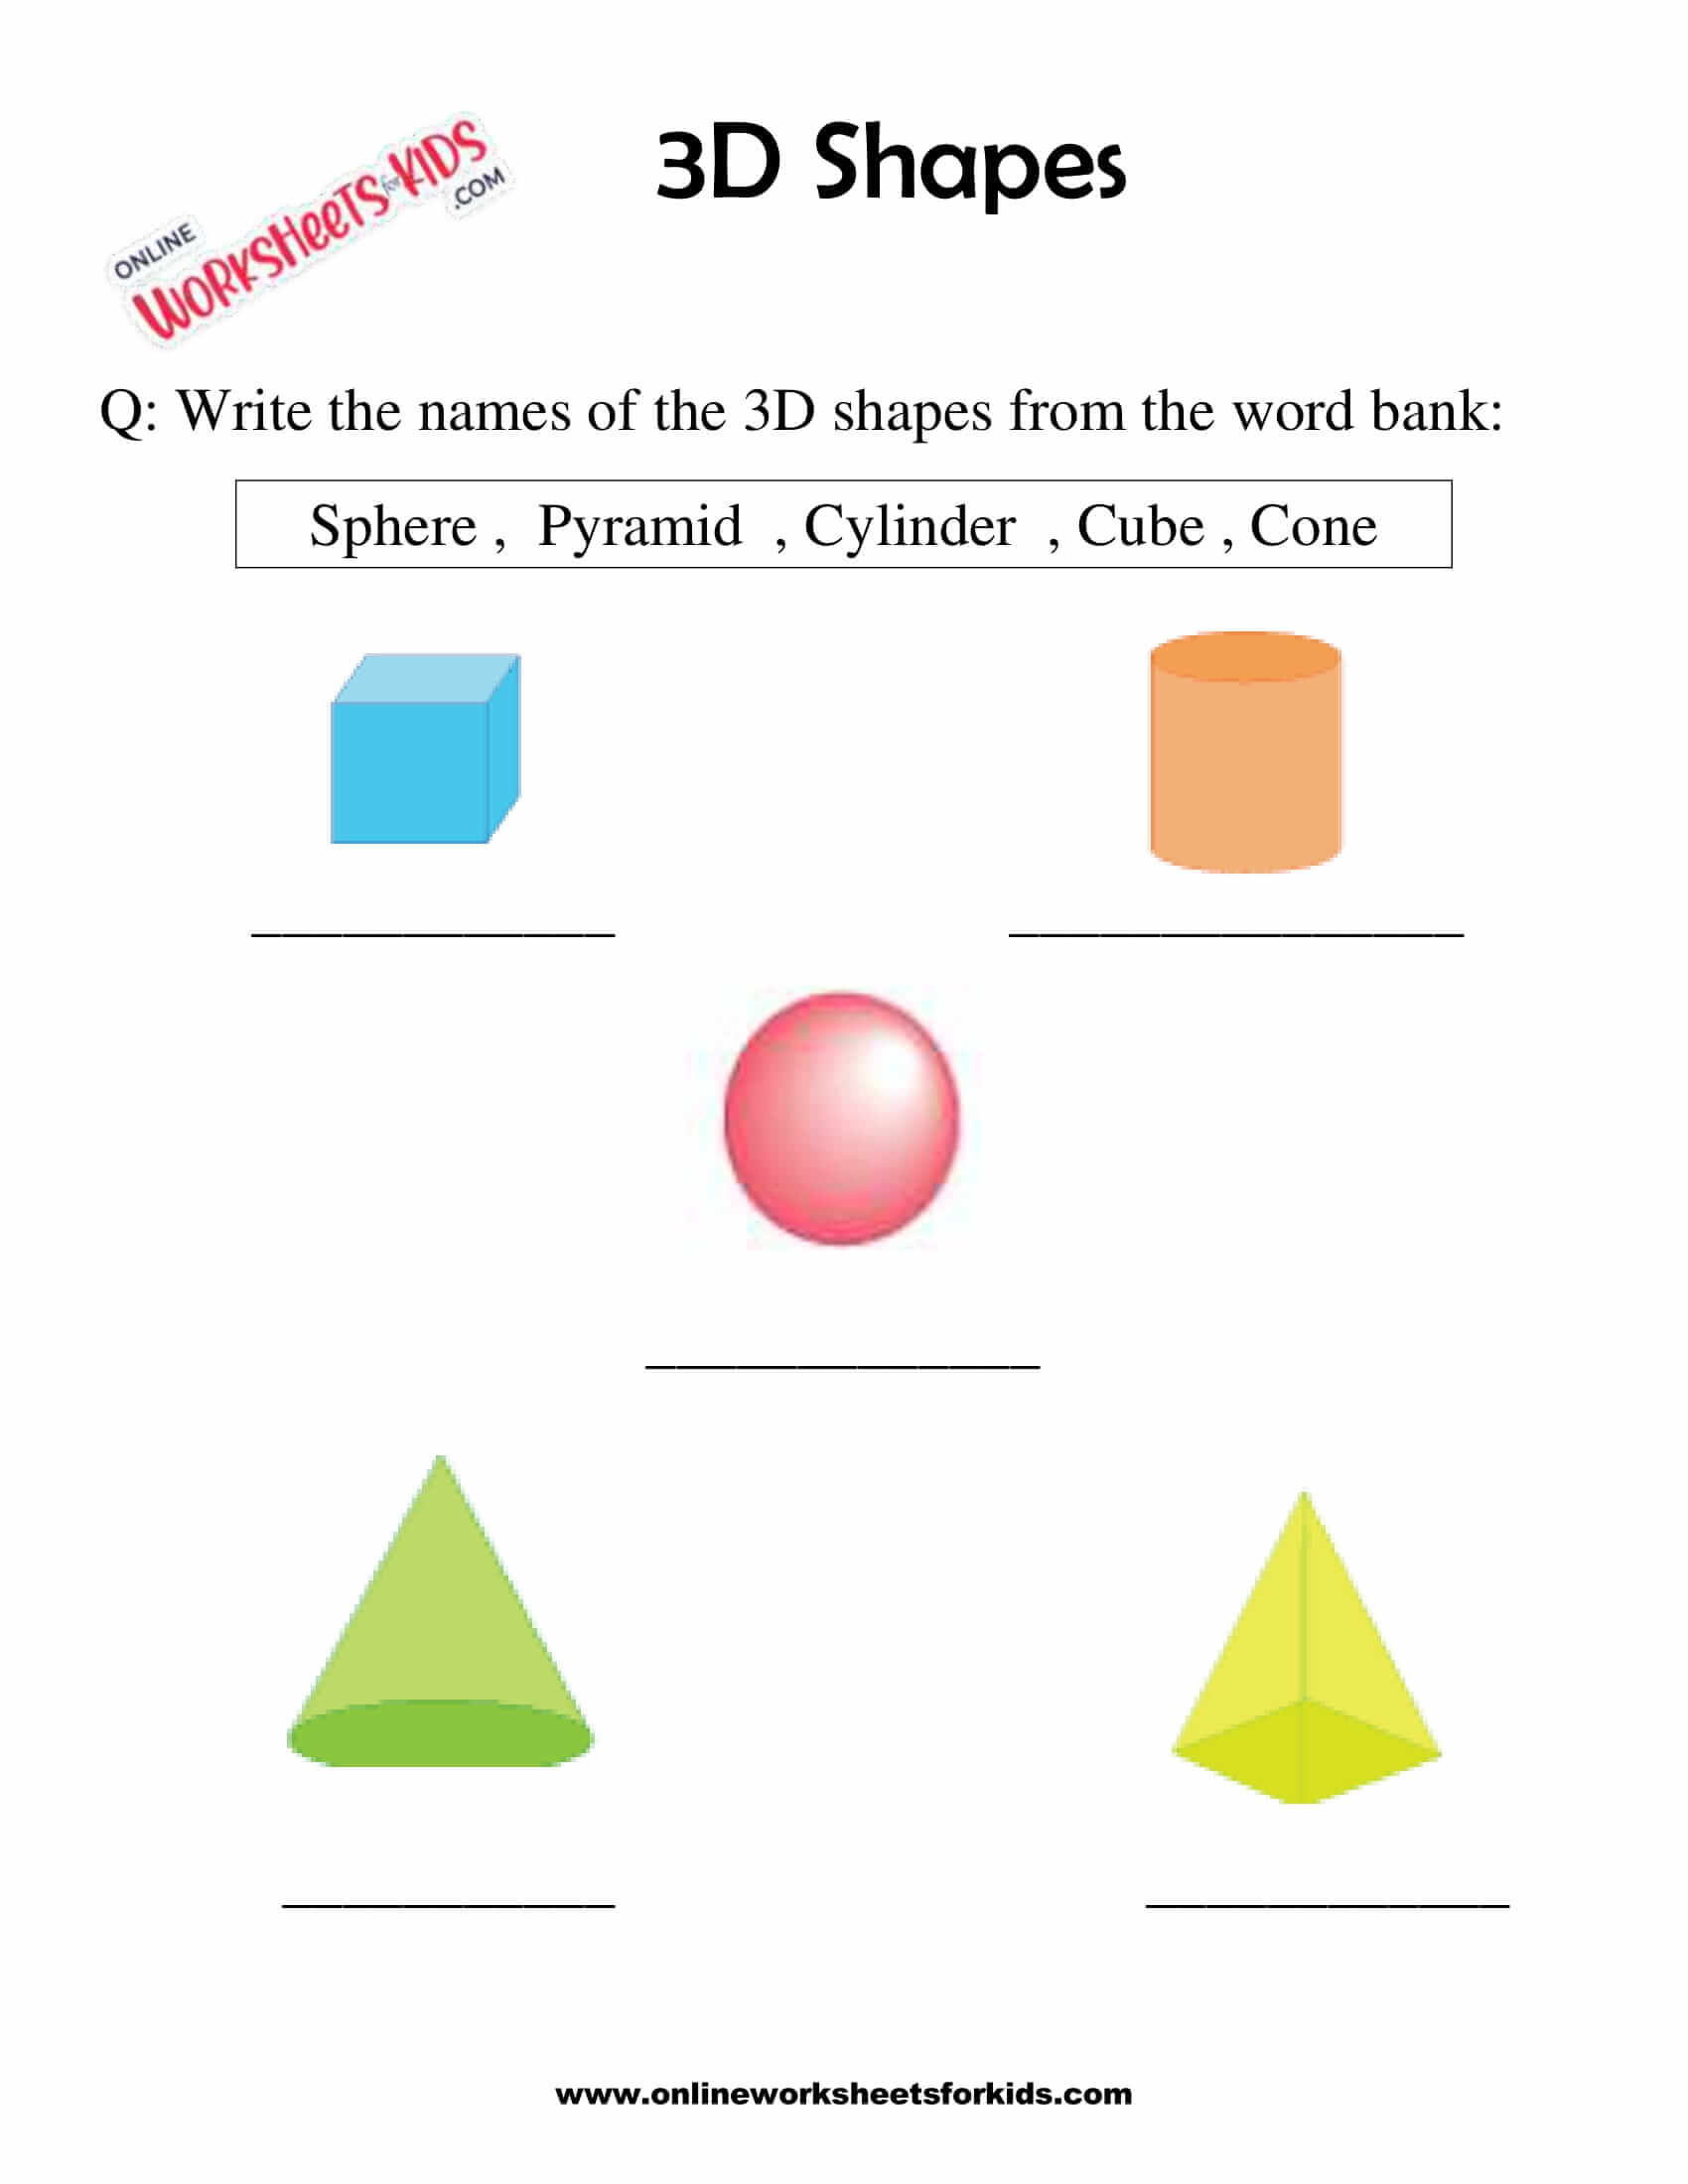 Shapes online exercise for Grade 2